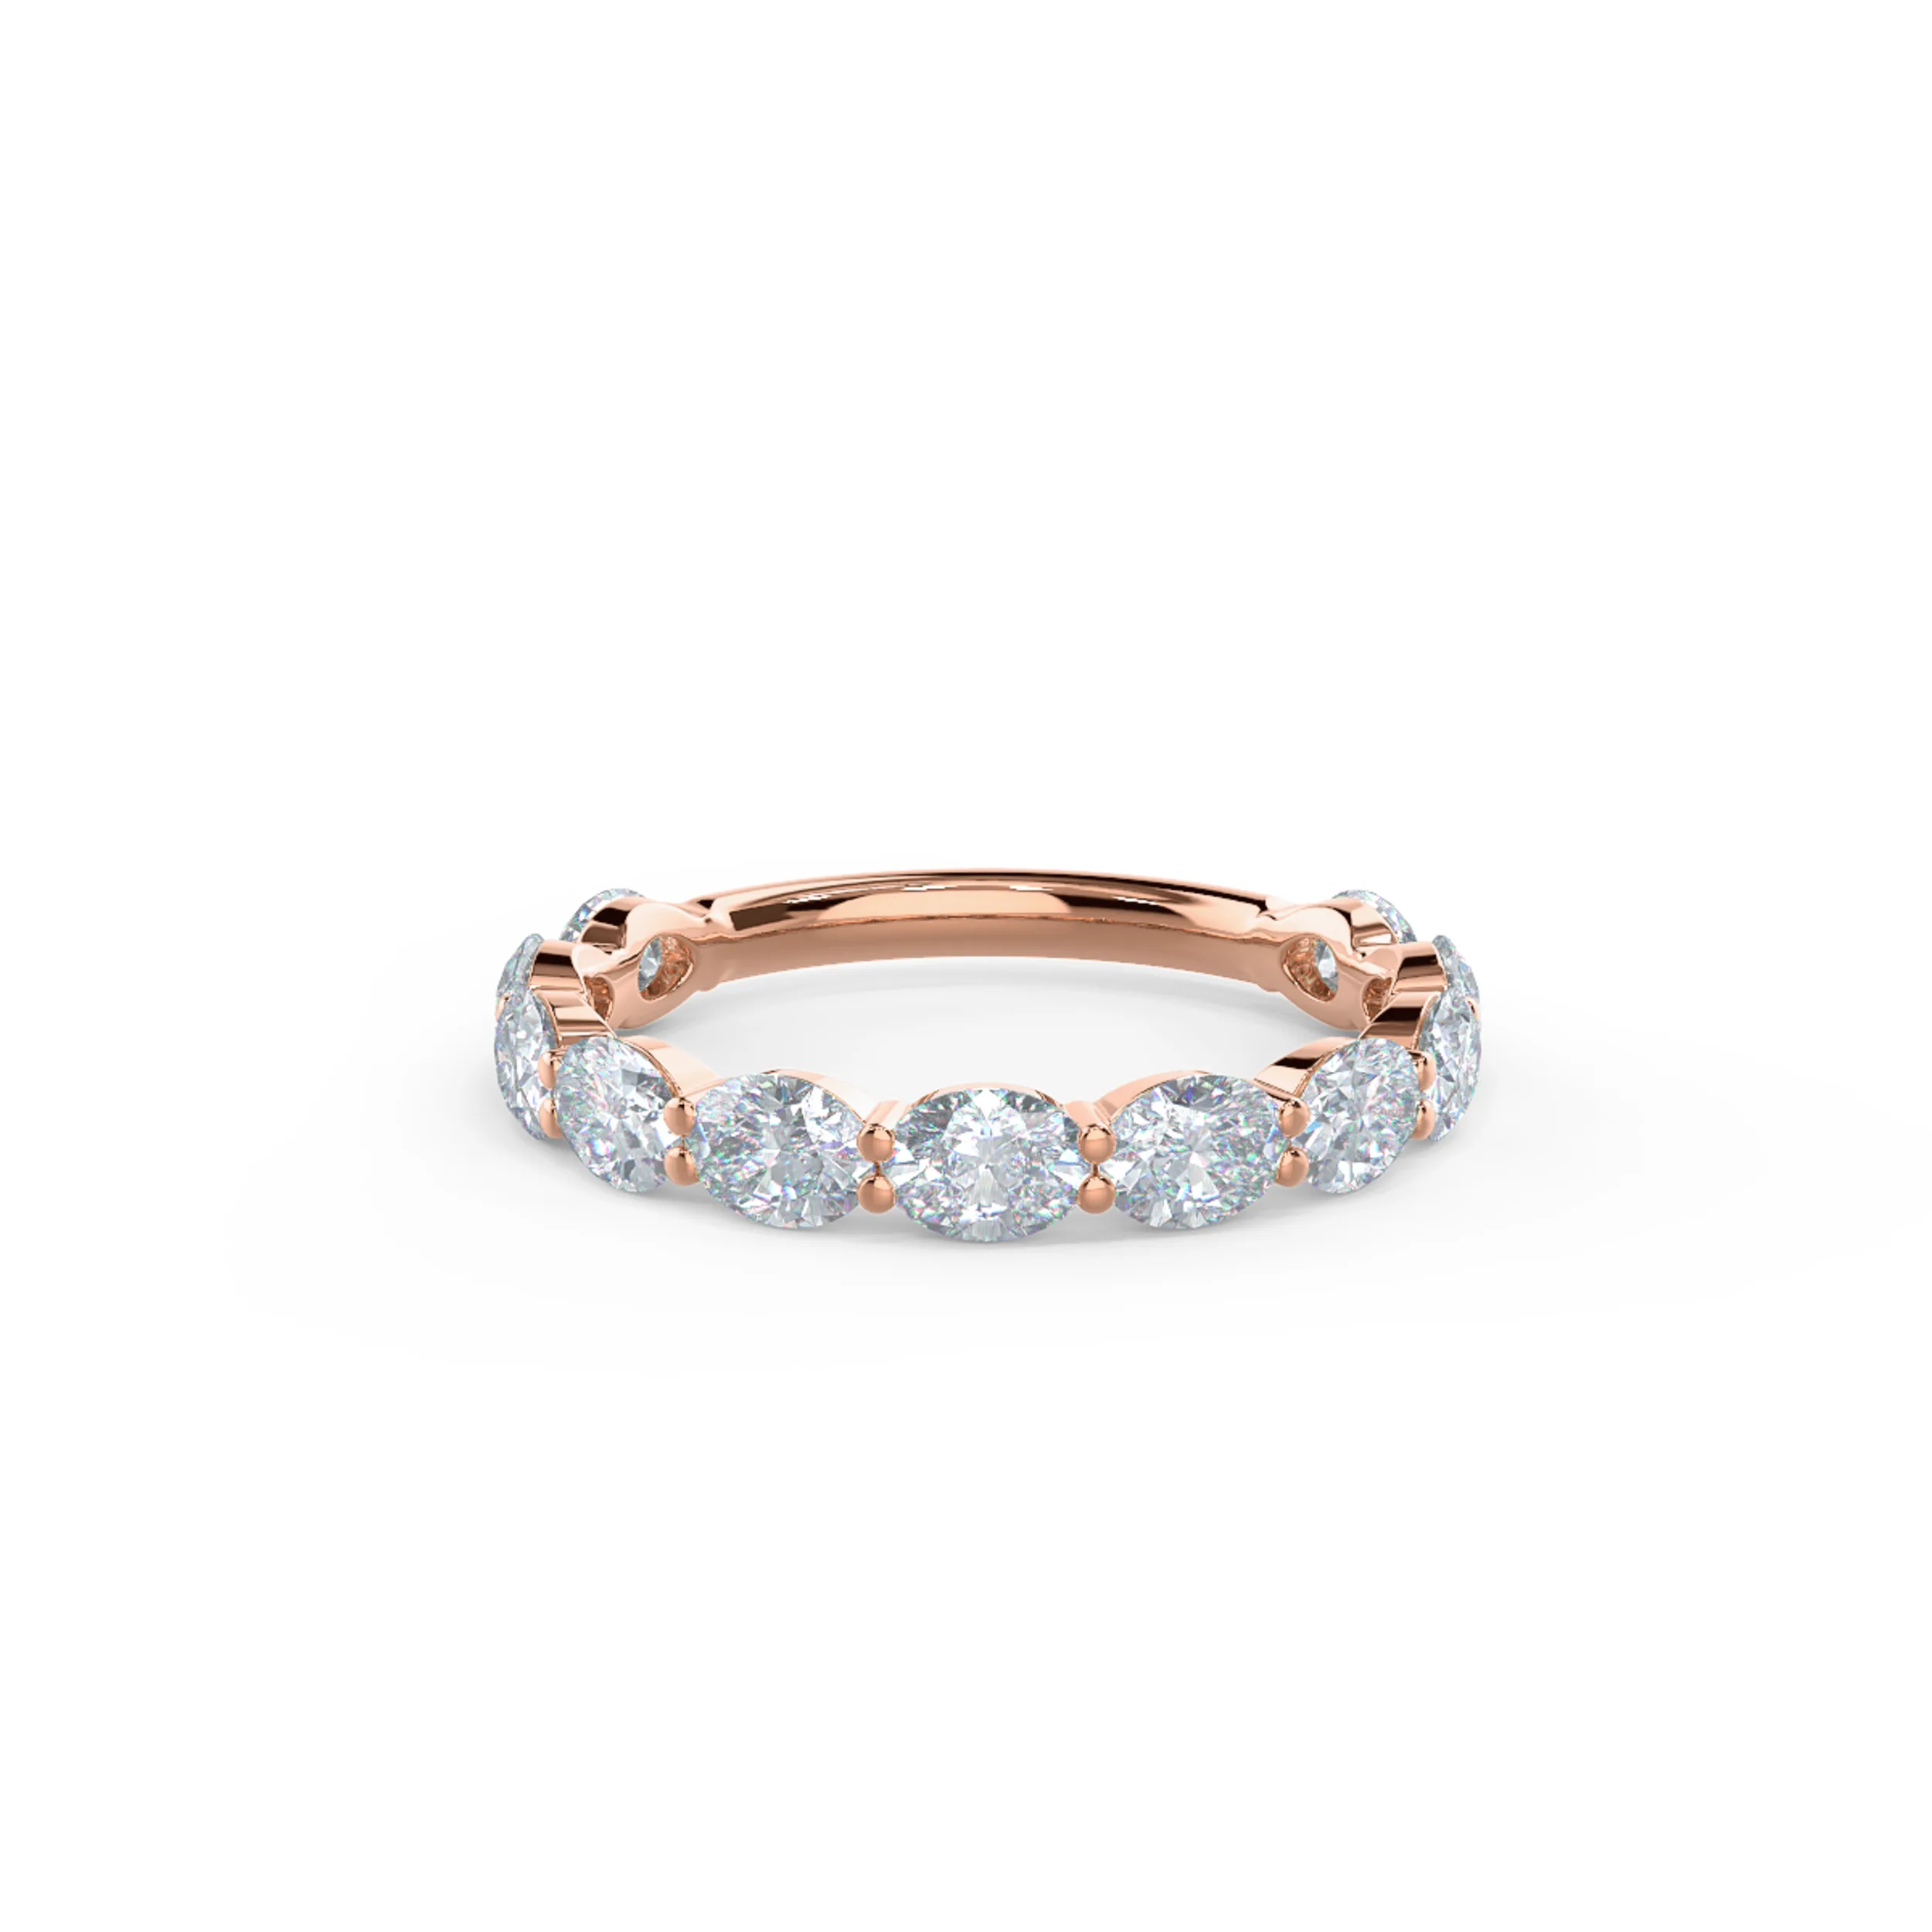 Exceptional Quality 1.65 ctw Diamonds Oval East-West Three Quarter Band in 14kt Rose Gold (Main View)